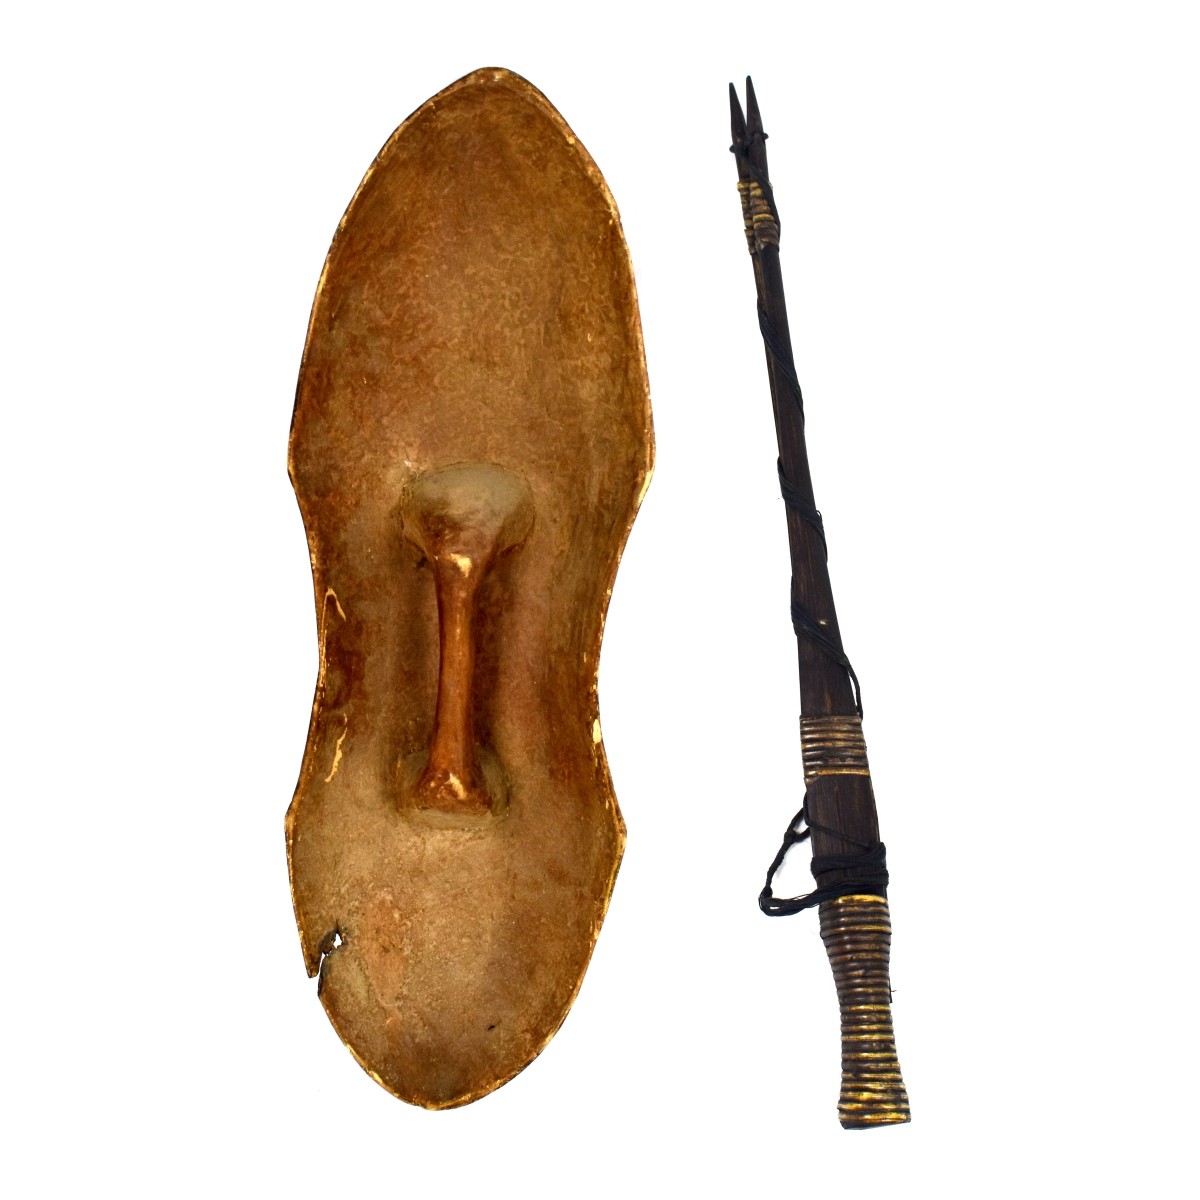 African Songye Shield and Spear